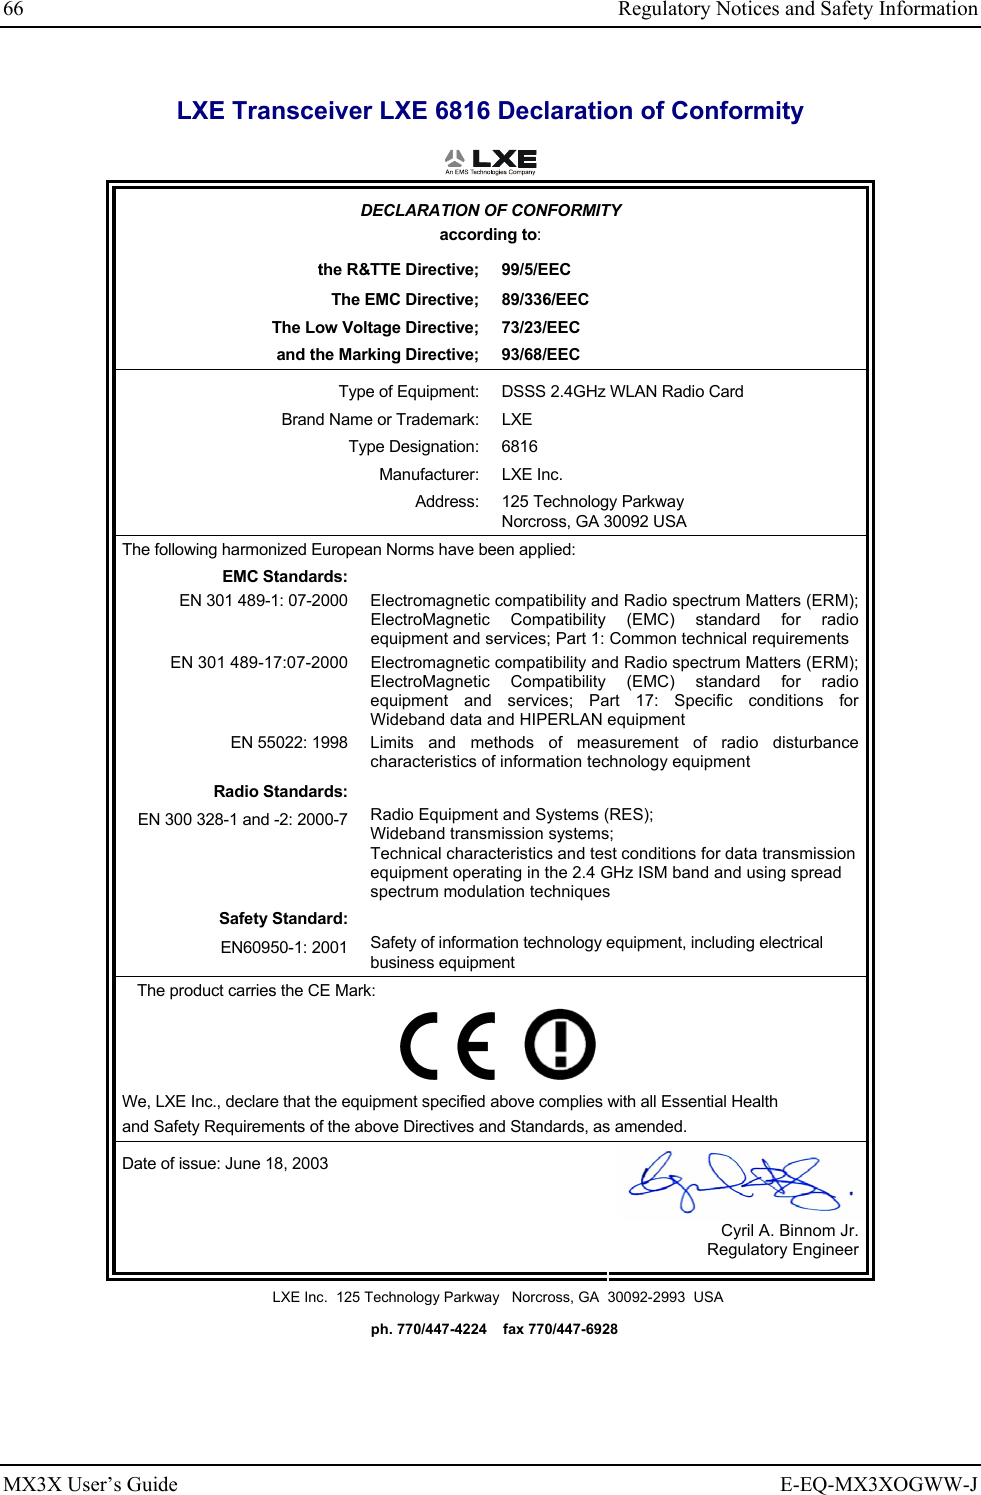 66  Regulatory Notices and Safety Information MX3X User’s Guide  E-EQ-MX3XOGWW-J LXE Transceiver LXE 6816 Declaration of Conformity  DECLARATION OF CONFORMITY according to: the R&amp;TTE Directive;  99/5/EEC The EMC Directive;  89/336/EEC The Low Voltage Directive;  73/23/EEC and the Marking Directive;  93/68/EEC Type of Equipment:  DSSS 2.4GHz WLAN Radio Card Brand Name or Trademark:  LXE Type Designation:  6816 Manufacturer: LXE Inc. Address: 125 Technology Parkway Norcross, GA 30092 USA The following harmonized European Norms have been applied:   EMC Standards:  EN 301 489-1: 07-2000  Electromagnetic compatibility and Radio spectrum Matters (ERM); ElectroMagnetic Compatibility (EMC) standard for radio equipment and services; Part 1: Common technical requirements EN 301 489-17:07-2000  Electromagnetic compatibility and Radio spectrum Matters (ERM); ElectroMagnetic Compatibility (EMC) standard for radio equipment and services; Part 17: Specific conditions for Wideband data and HIPERLAN equipment EN 55022: 1998 Limits and methods of measurement of radio disturbance characteristics of information technology equipment Radio Standards:  EN 300 328-1 and -2: 2000-7 Radio Equipment and Systems (RES); Wideband transmission systems; Technical characteristics and test conditions for data transmission equipment operating in the 2.4 GHz ISM band and using spread spectrum modulation techniques Safety Standard:  EN60950-1: 2001 Safety of information technology equipment, including electrical business equipment The product carries the CE Mark:         We, LXE Inc., declare that the equipment specified above complies with all Essential Health  and Safety Requirements of the above Directives and Standards, as amended. Date of issue: June 18, 2003  Cyril A. Binnom Jr. Regulatory Engineer LXE Inc.  125 Technology Parkway   Norcross, GA  30092-2993  USA   ph. 770/447-4224    fax 770/447-6928 